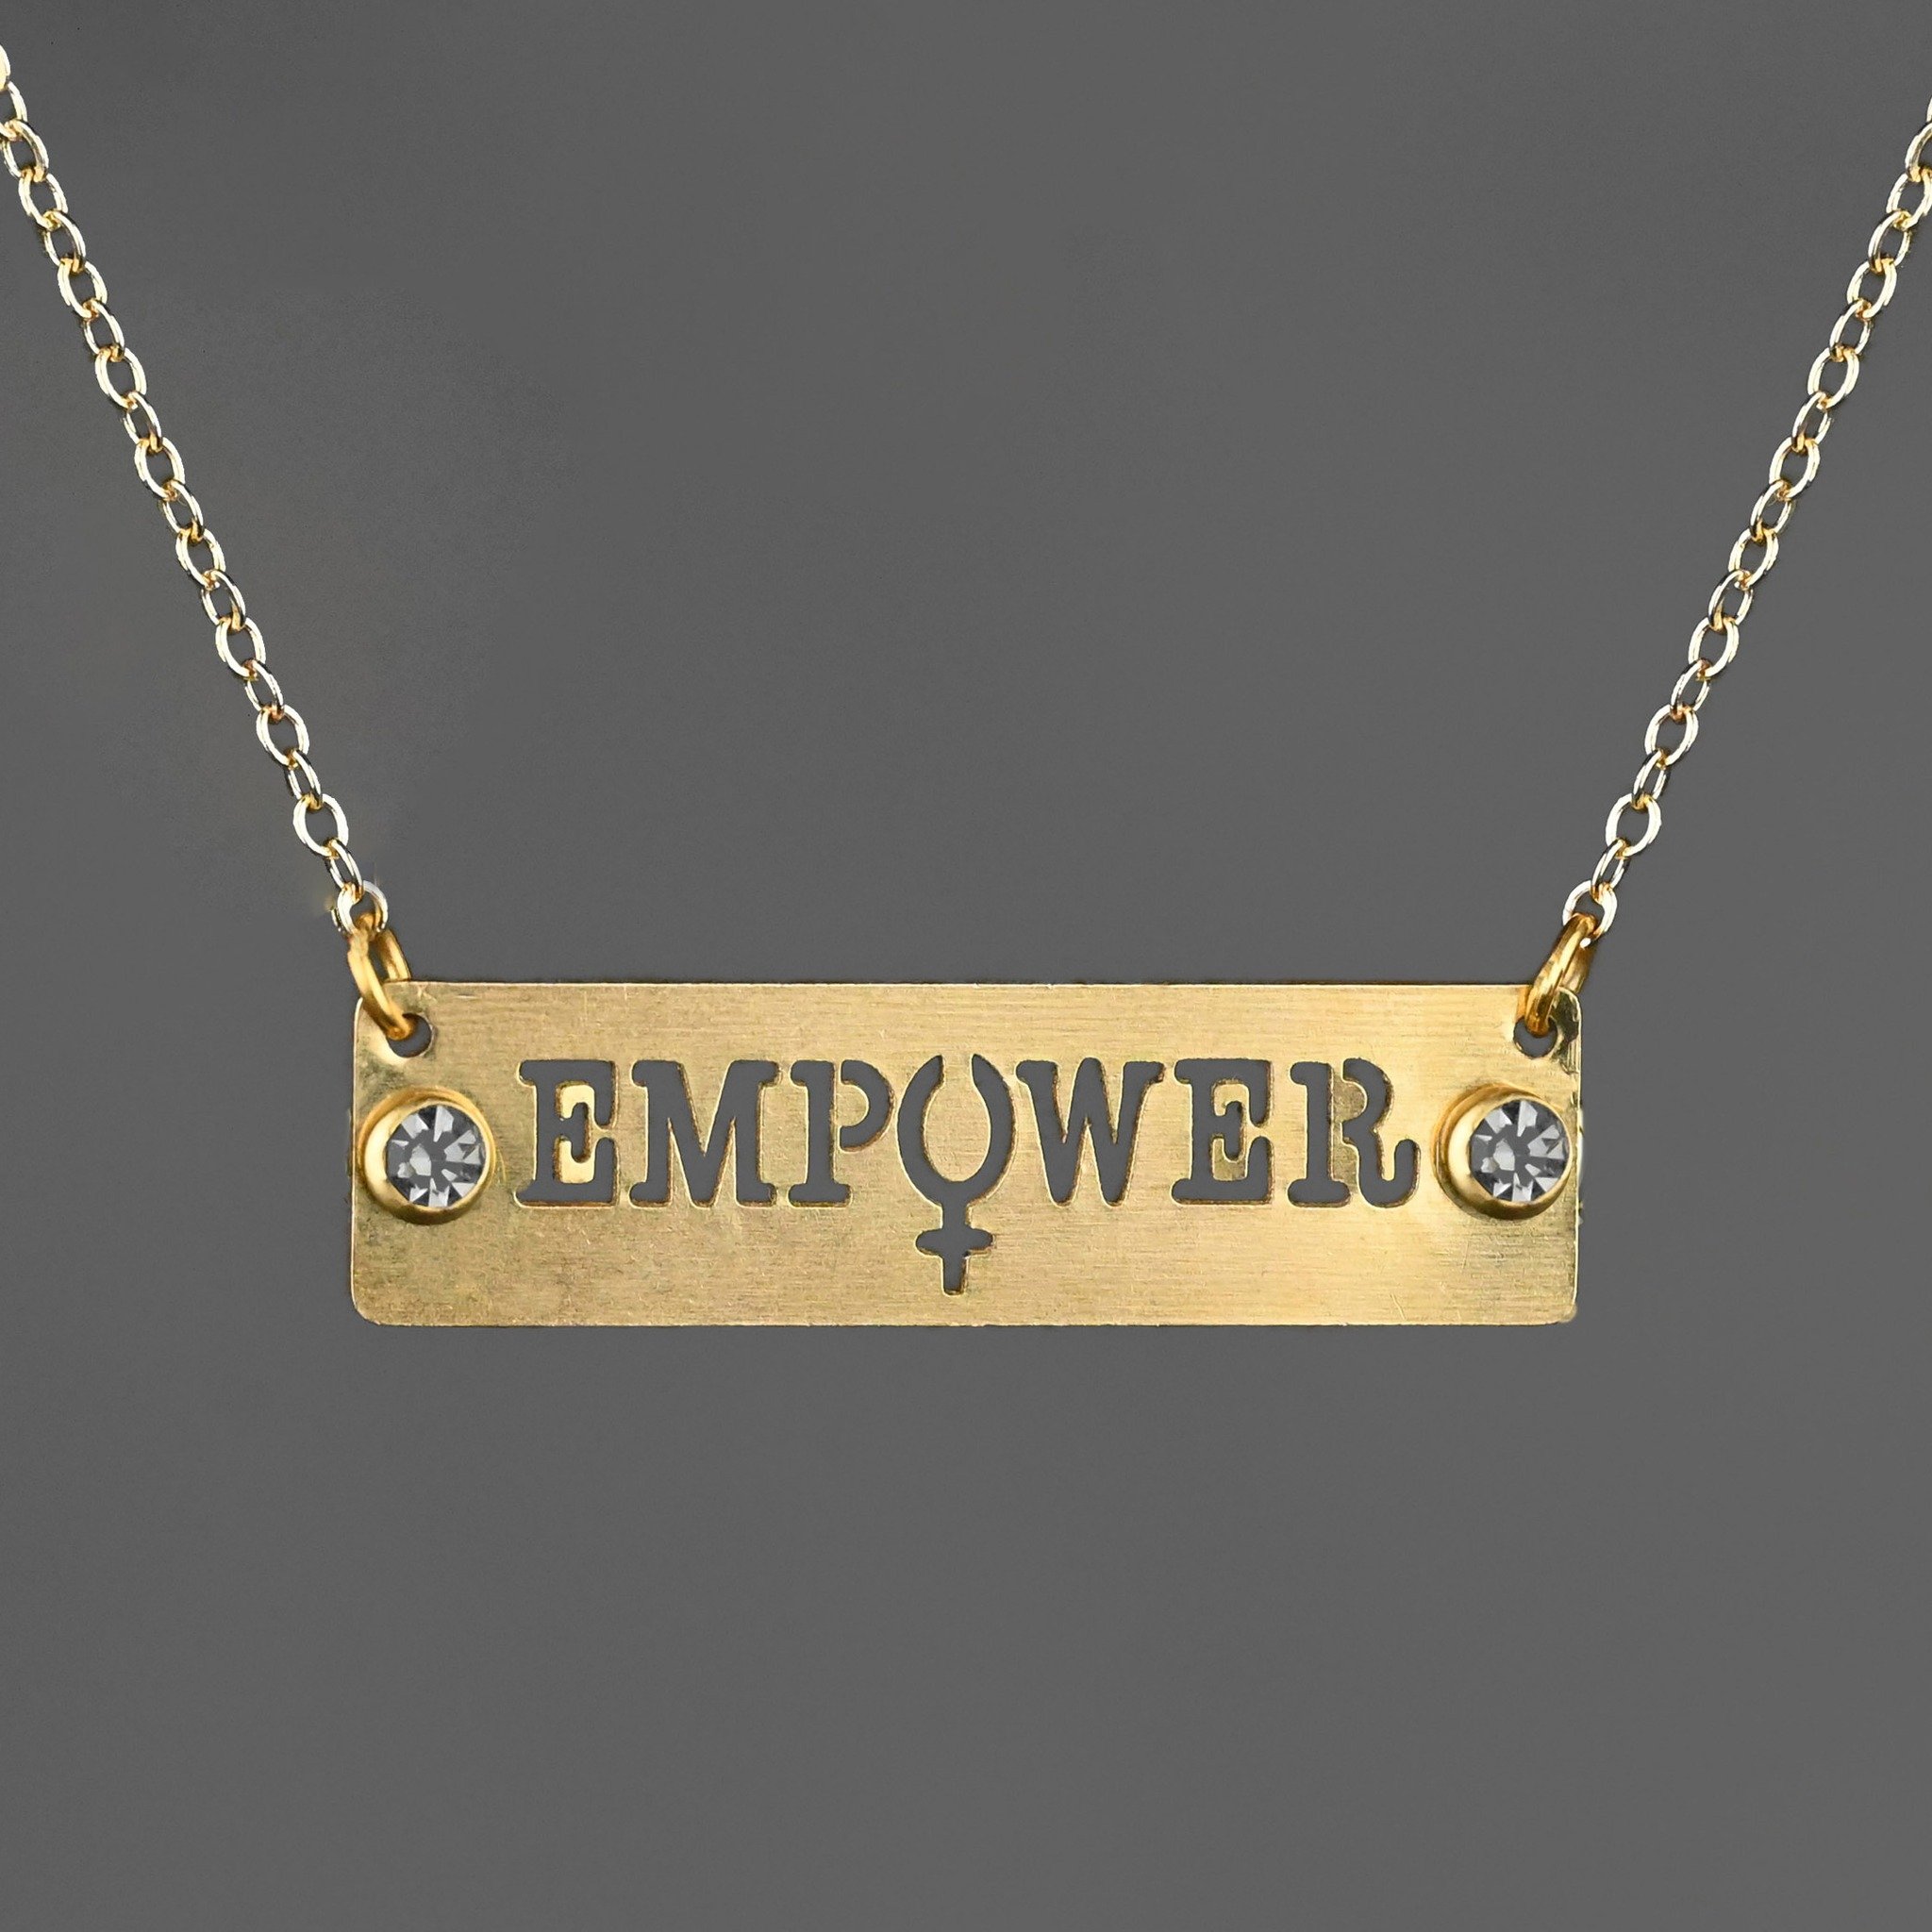 May each of us feel empowered!!! 🌙

Handmade With Art &amp; Soul 💛